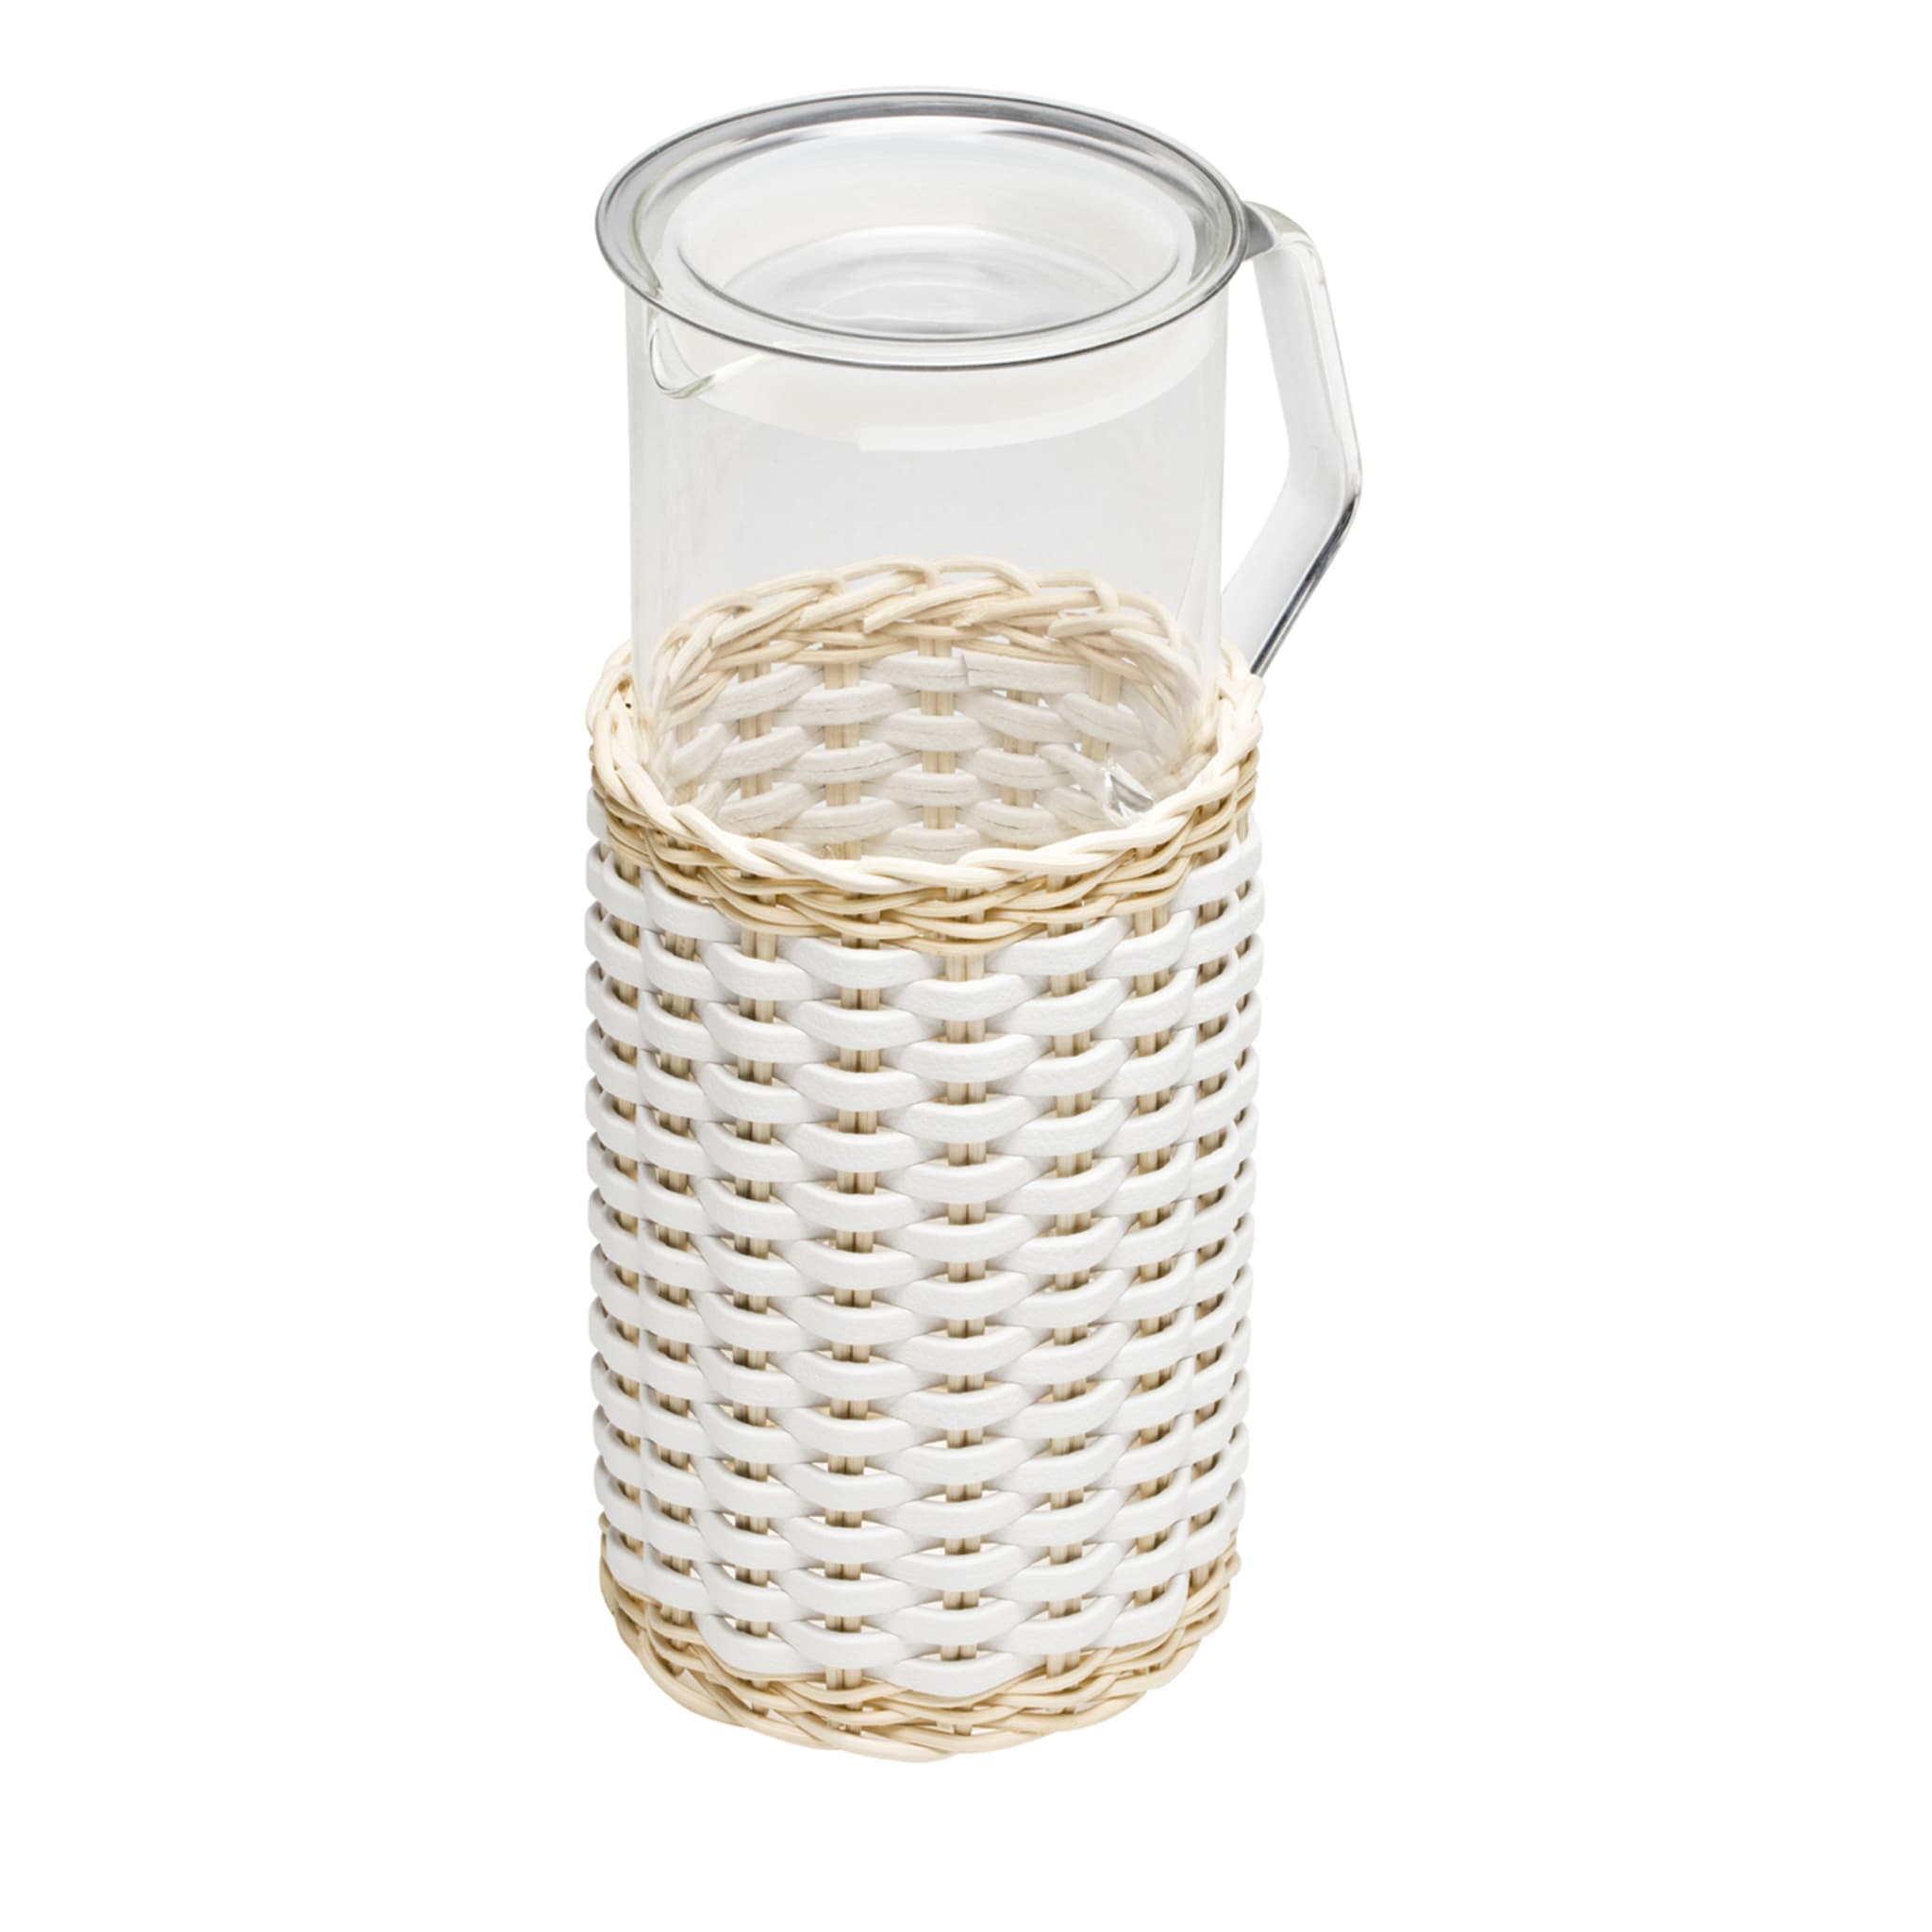 Marseille Leather & Rattan Glass Pitcher - White  - Main view